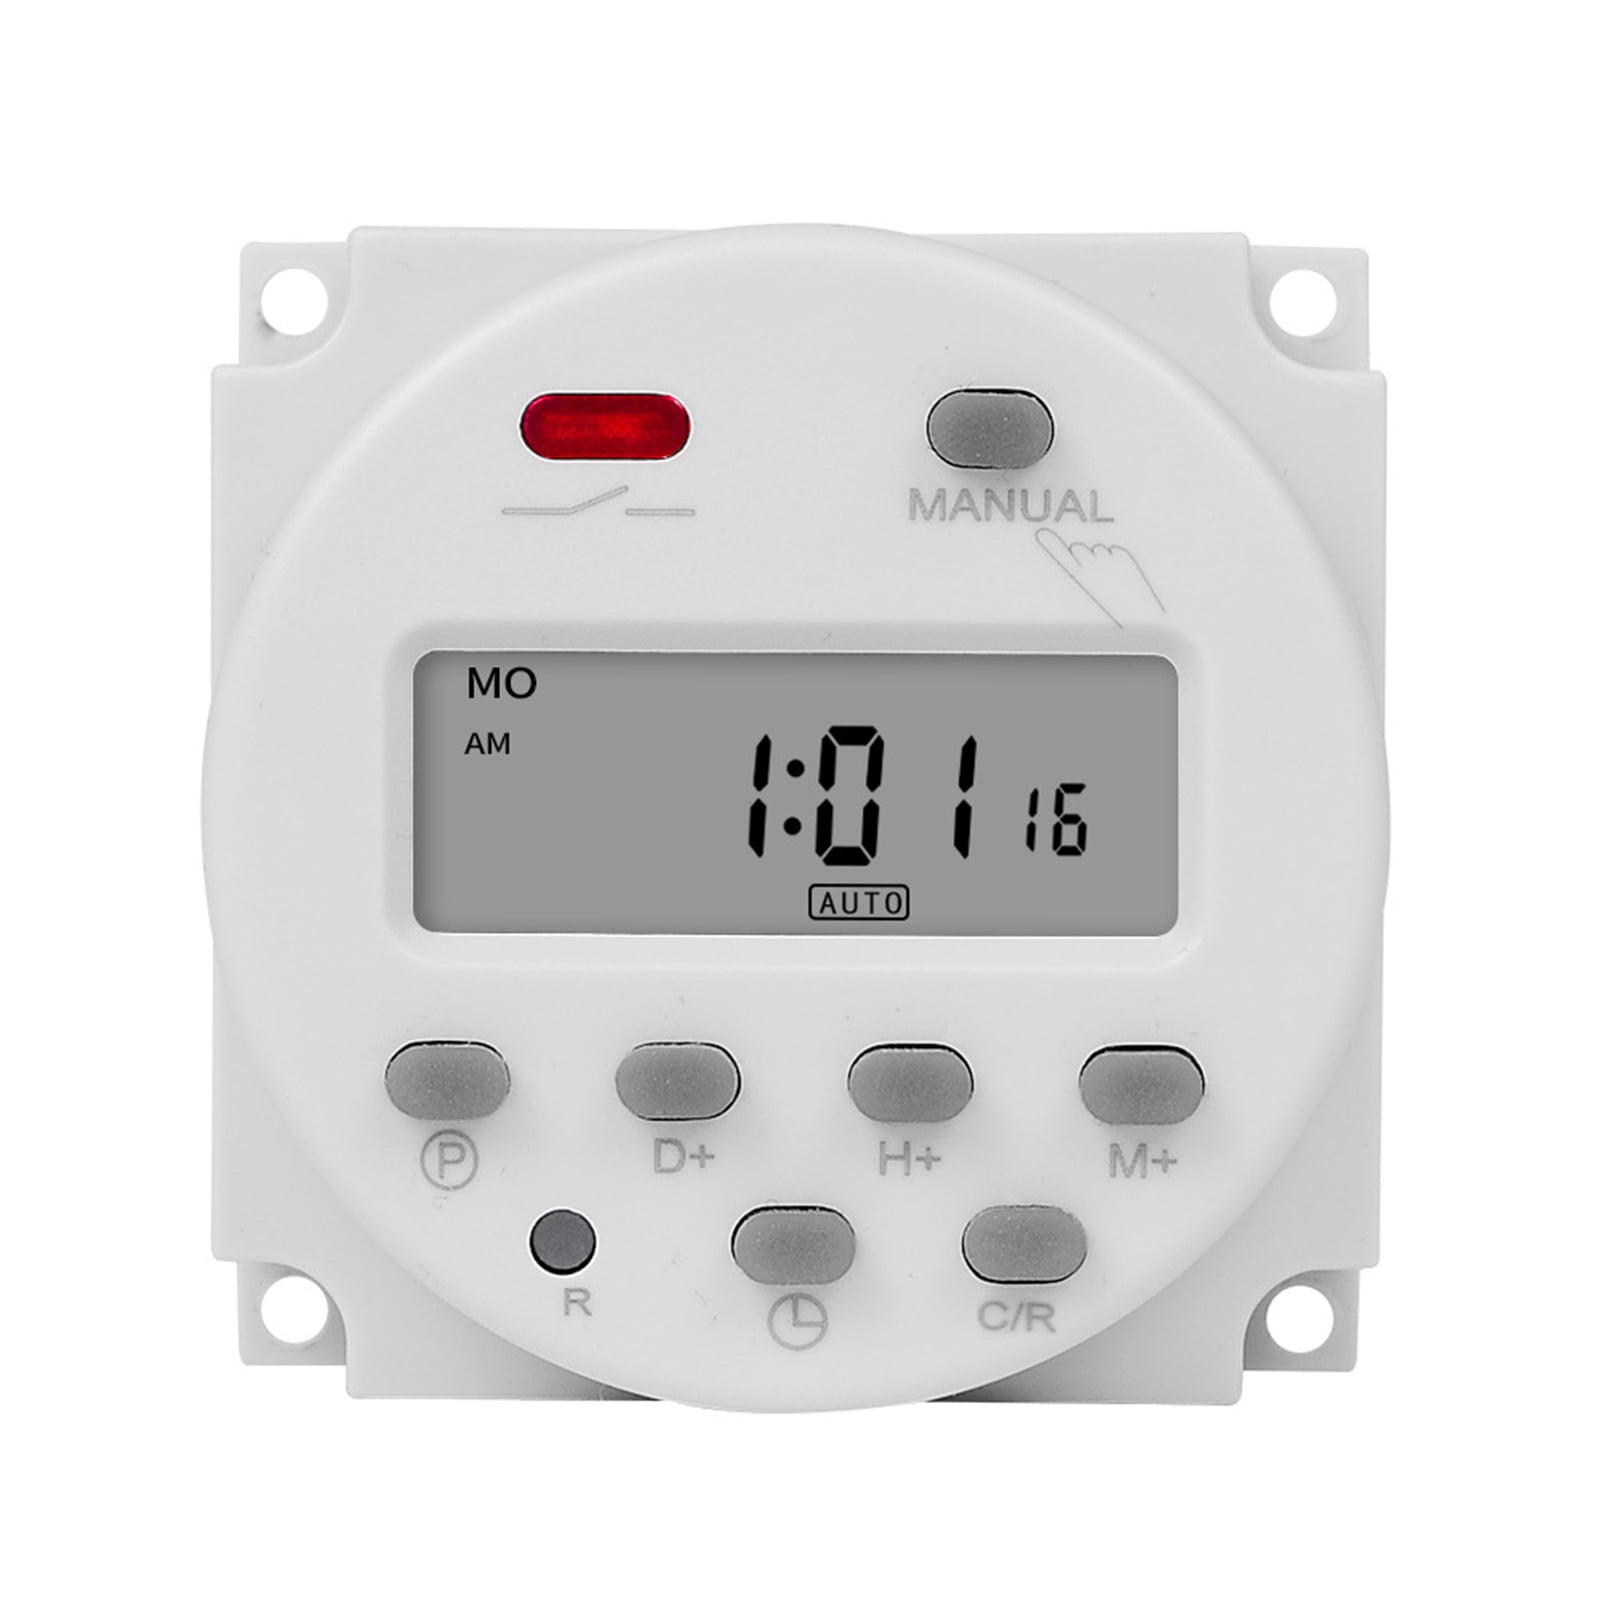 AC 220V-250V 16A LCD Digital Programmable Control Power Timer Switch Time Relay 